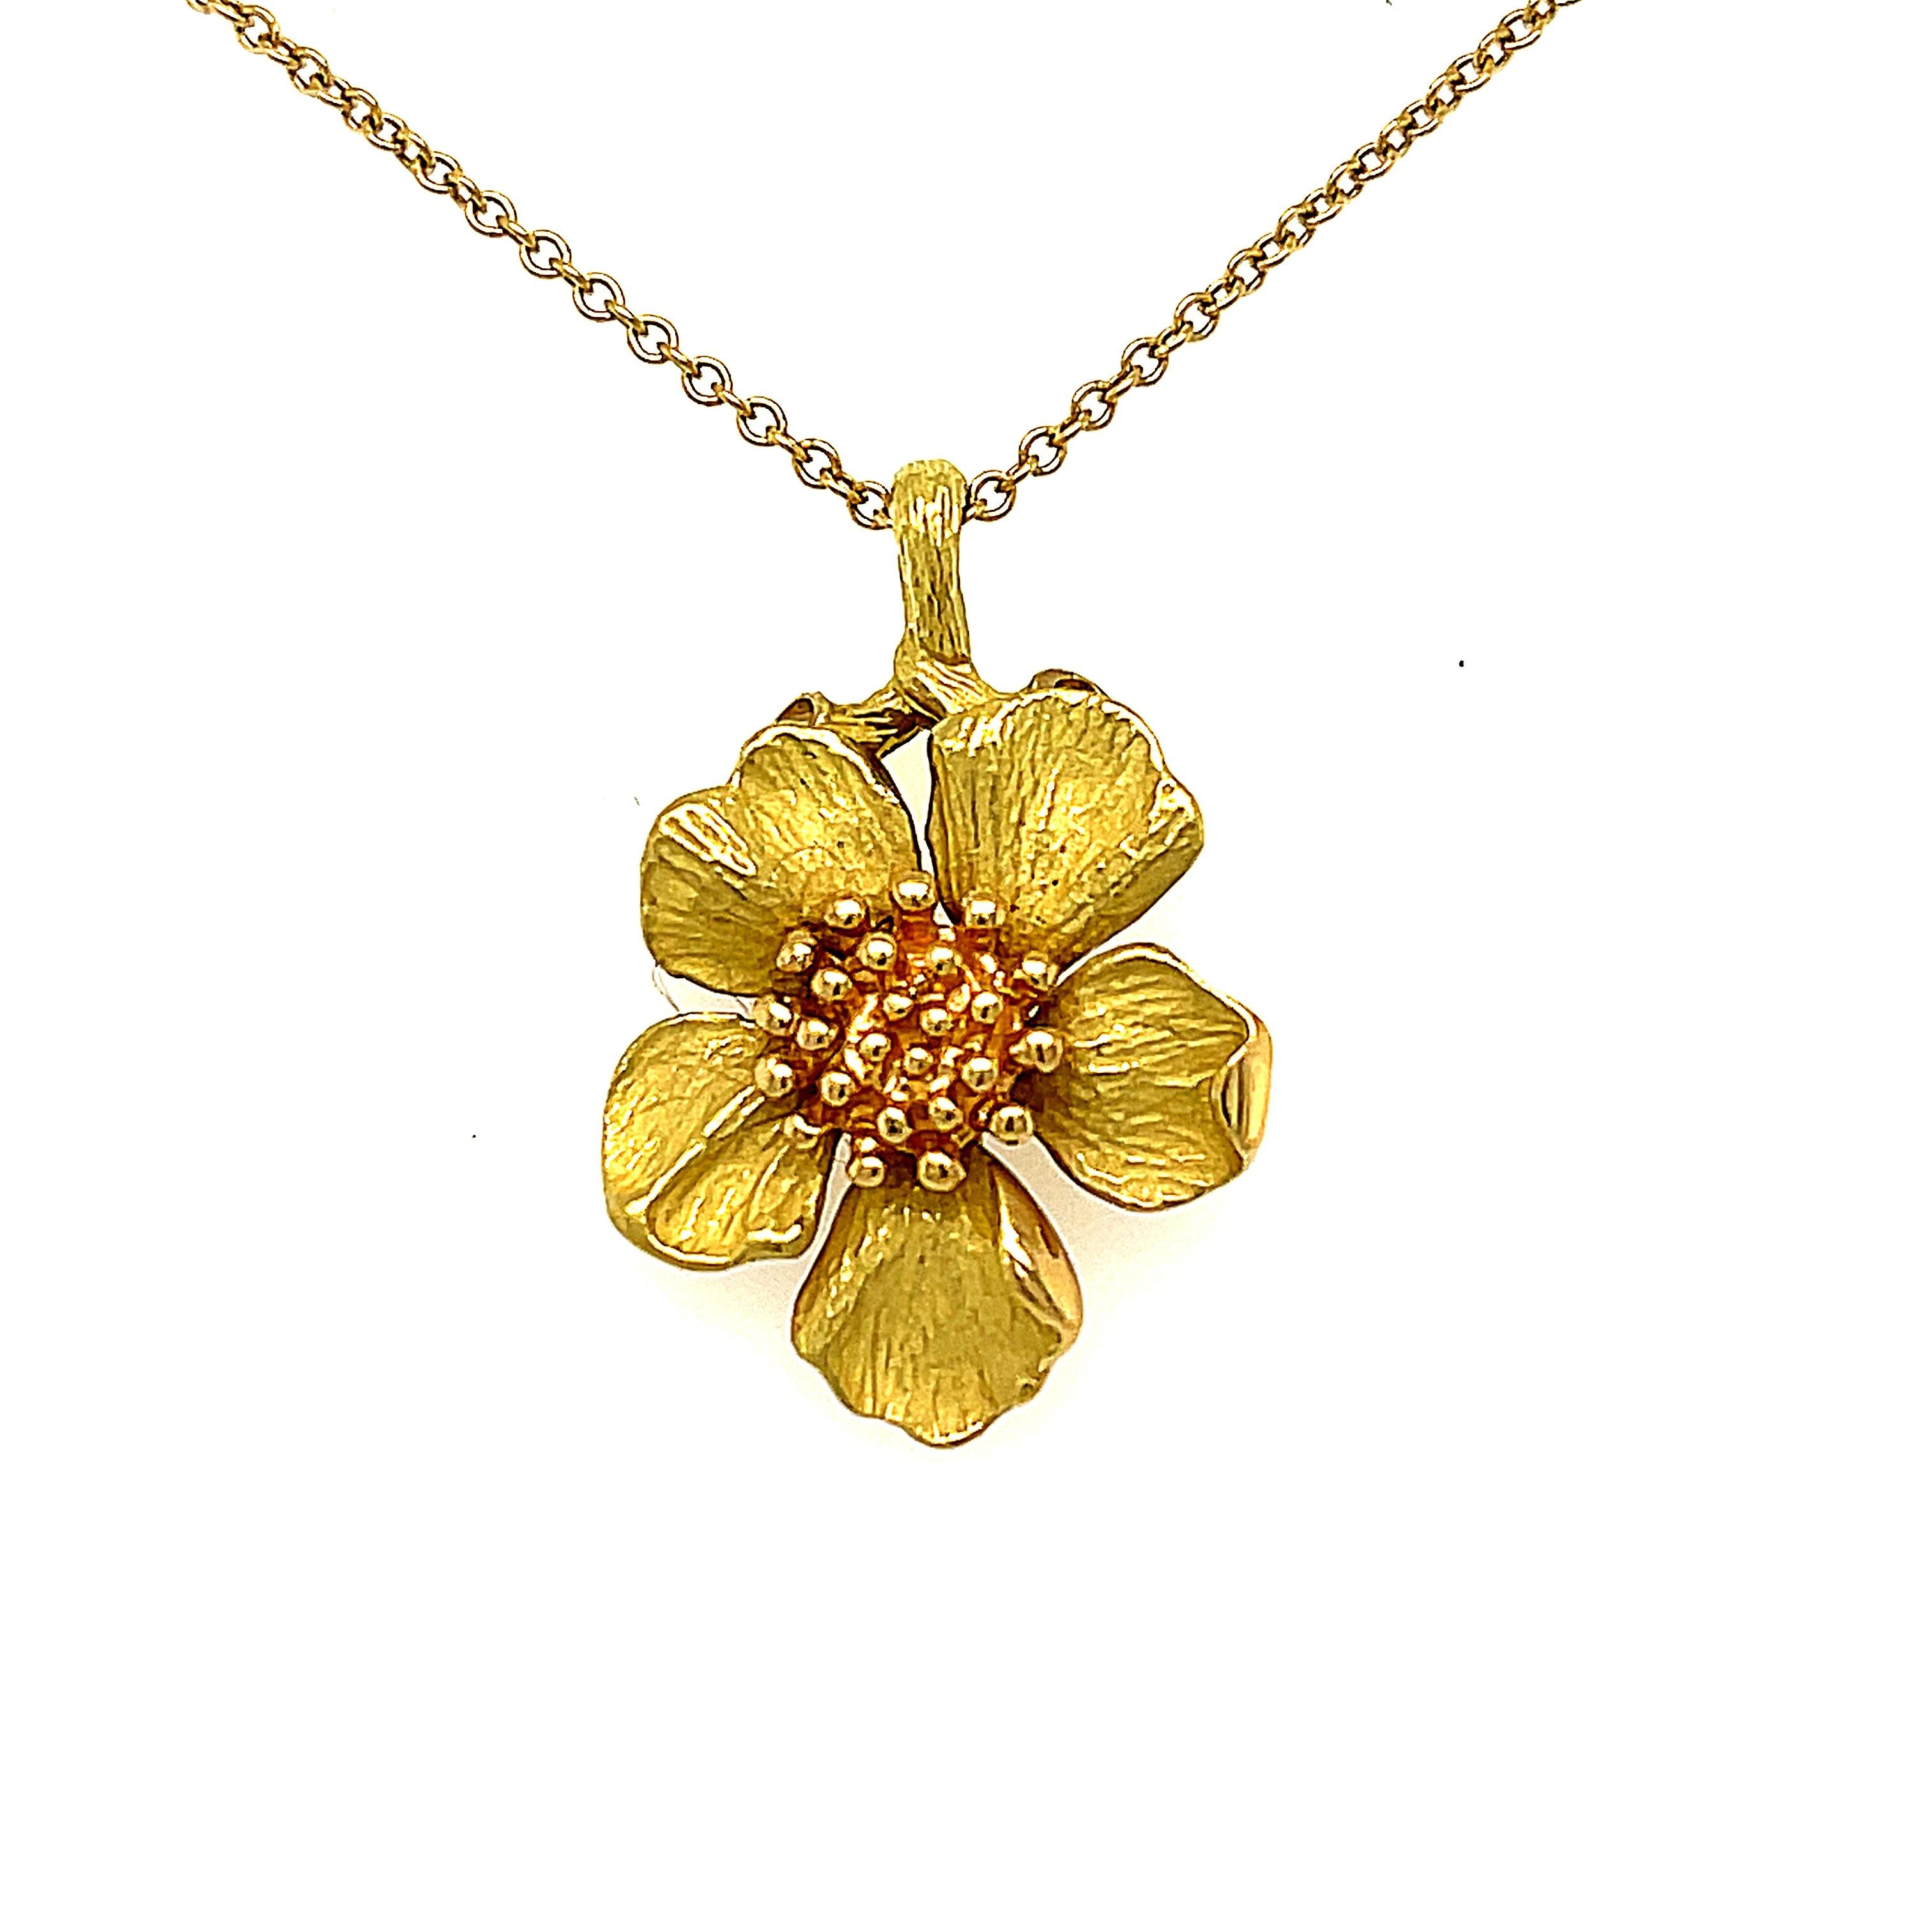 A vintage 18K Tiffany Dogwood Necklace and Earrings set, circa 1980. The earrings are a classic single dogwood flower shape, that is for pierced ears. The pendant is the same shape on a thin chain that is 16 inches long. Both the earring and the